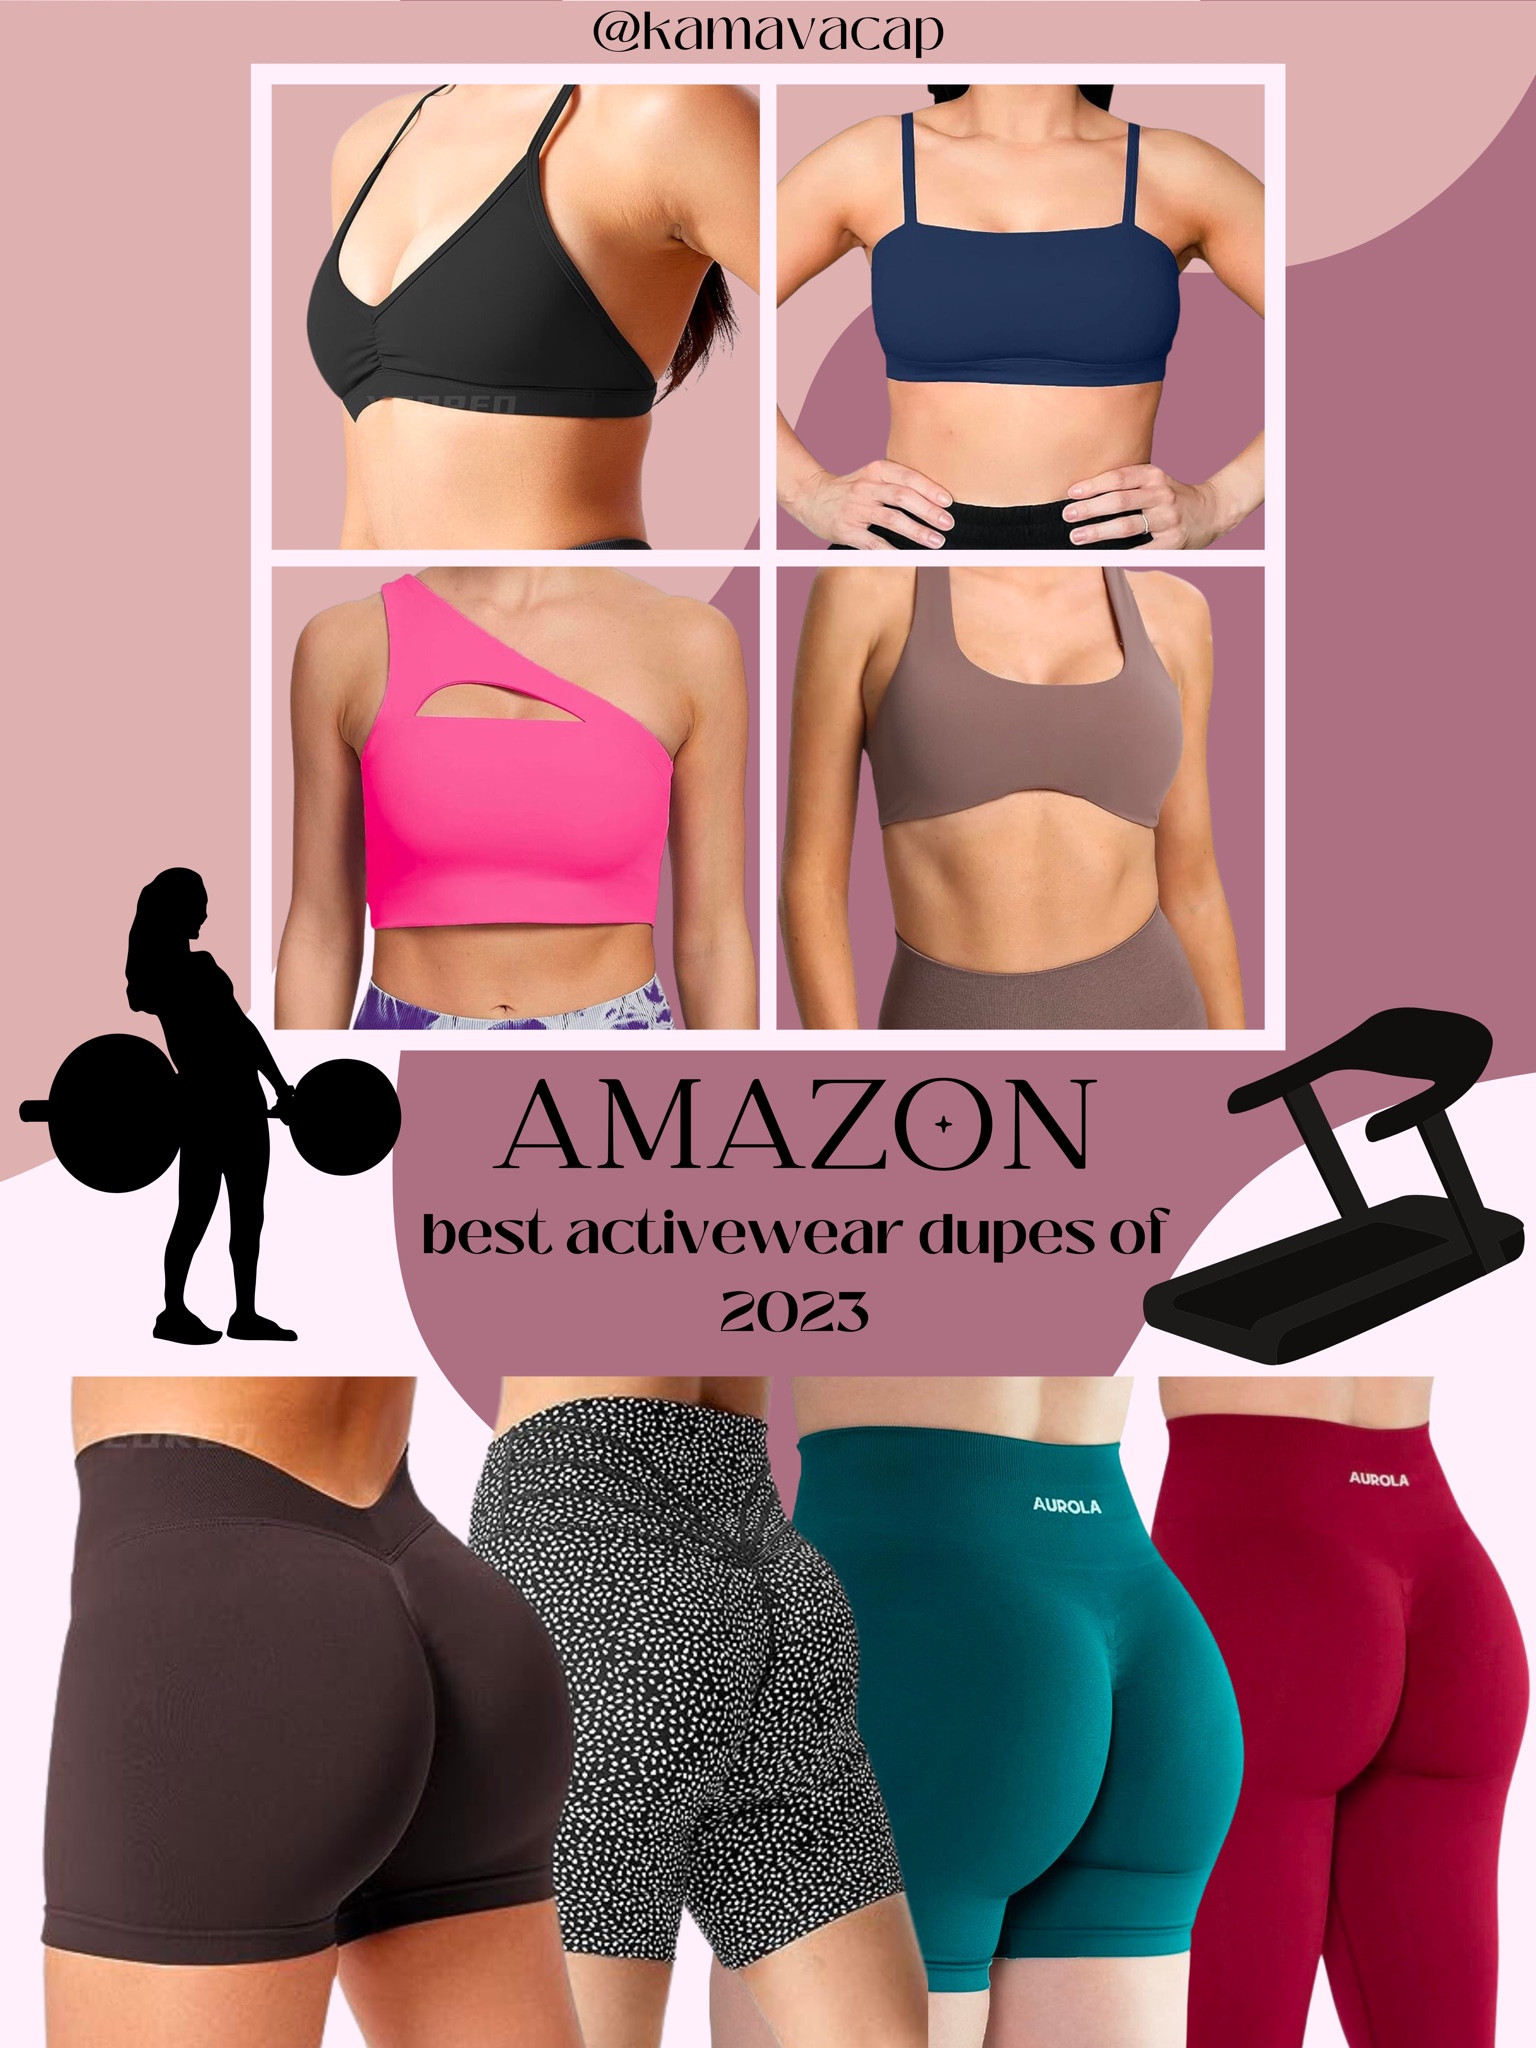 Buffbunny Legacy Leggings Dupes  Are These Aoxjox  Items WORTH IT?!  